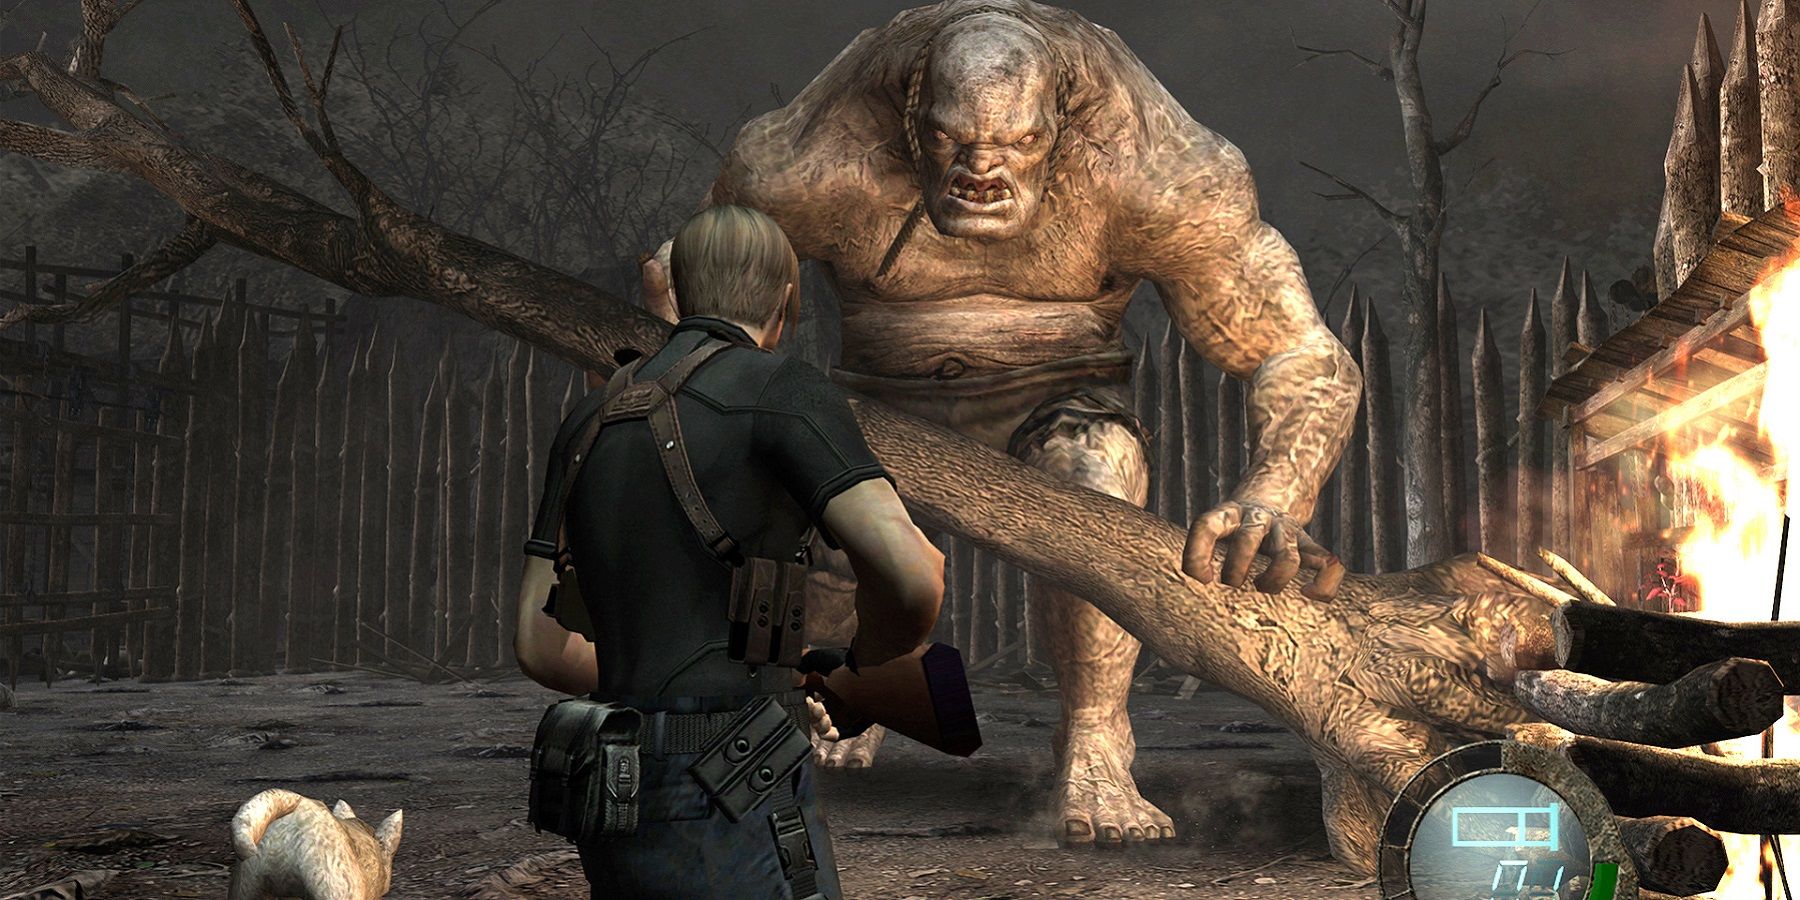 Screenshot from Resident Evil 4 showing Leon about to fight El Gigante.